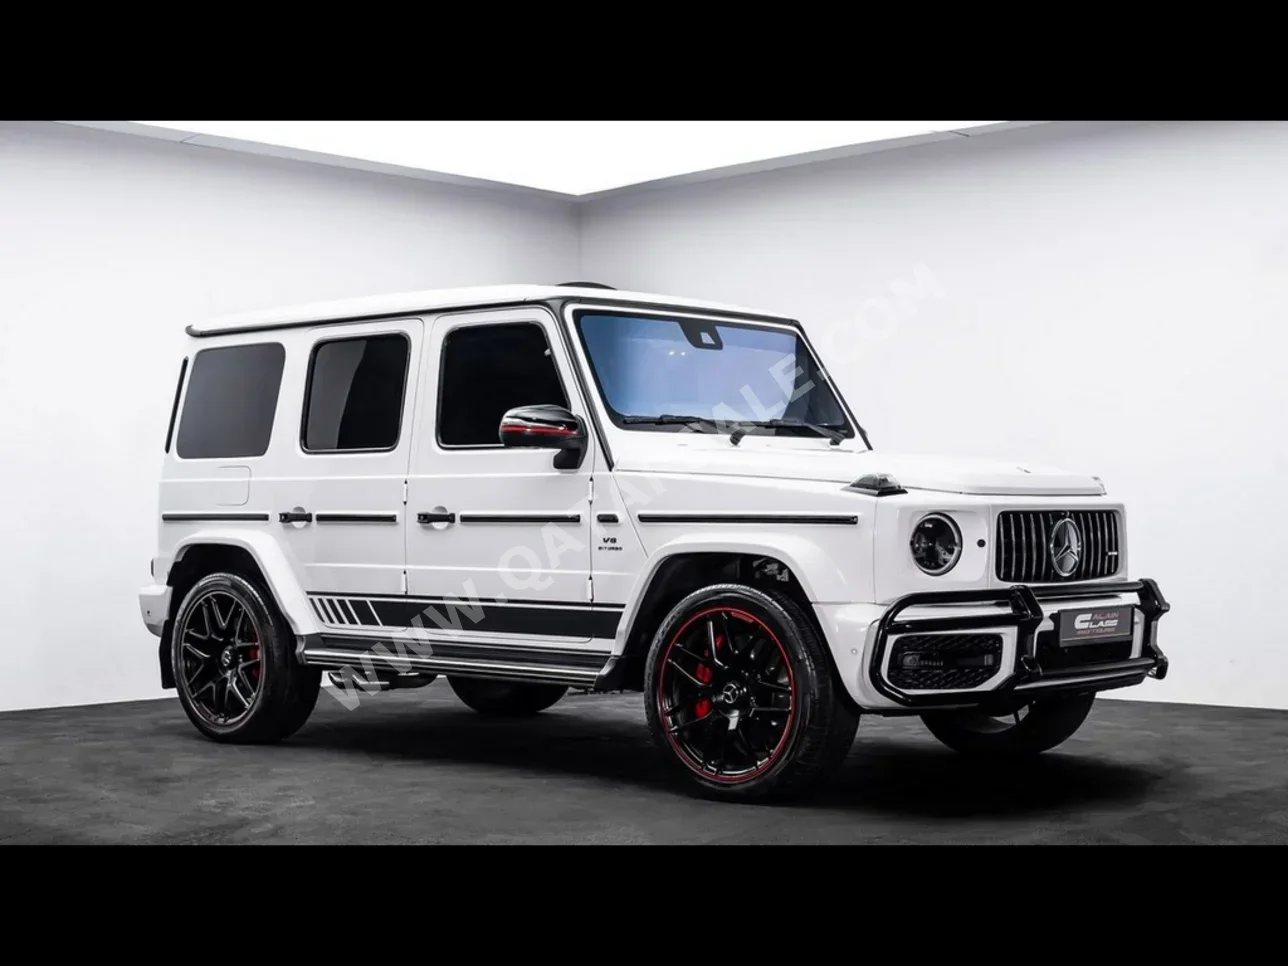 Mercedes-Benz  G-Class  63 AMG Edition 1  2020  Automatic  58,142 Km  8 Cylinder  Four Wheel Drive (4WD)  SUV  White